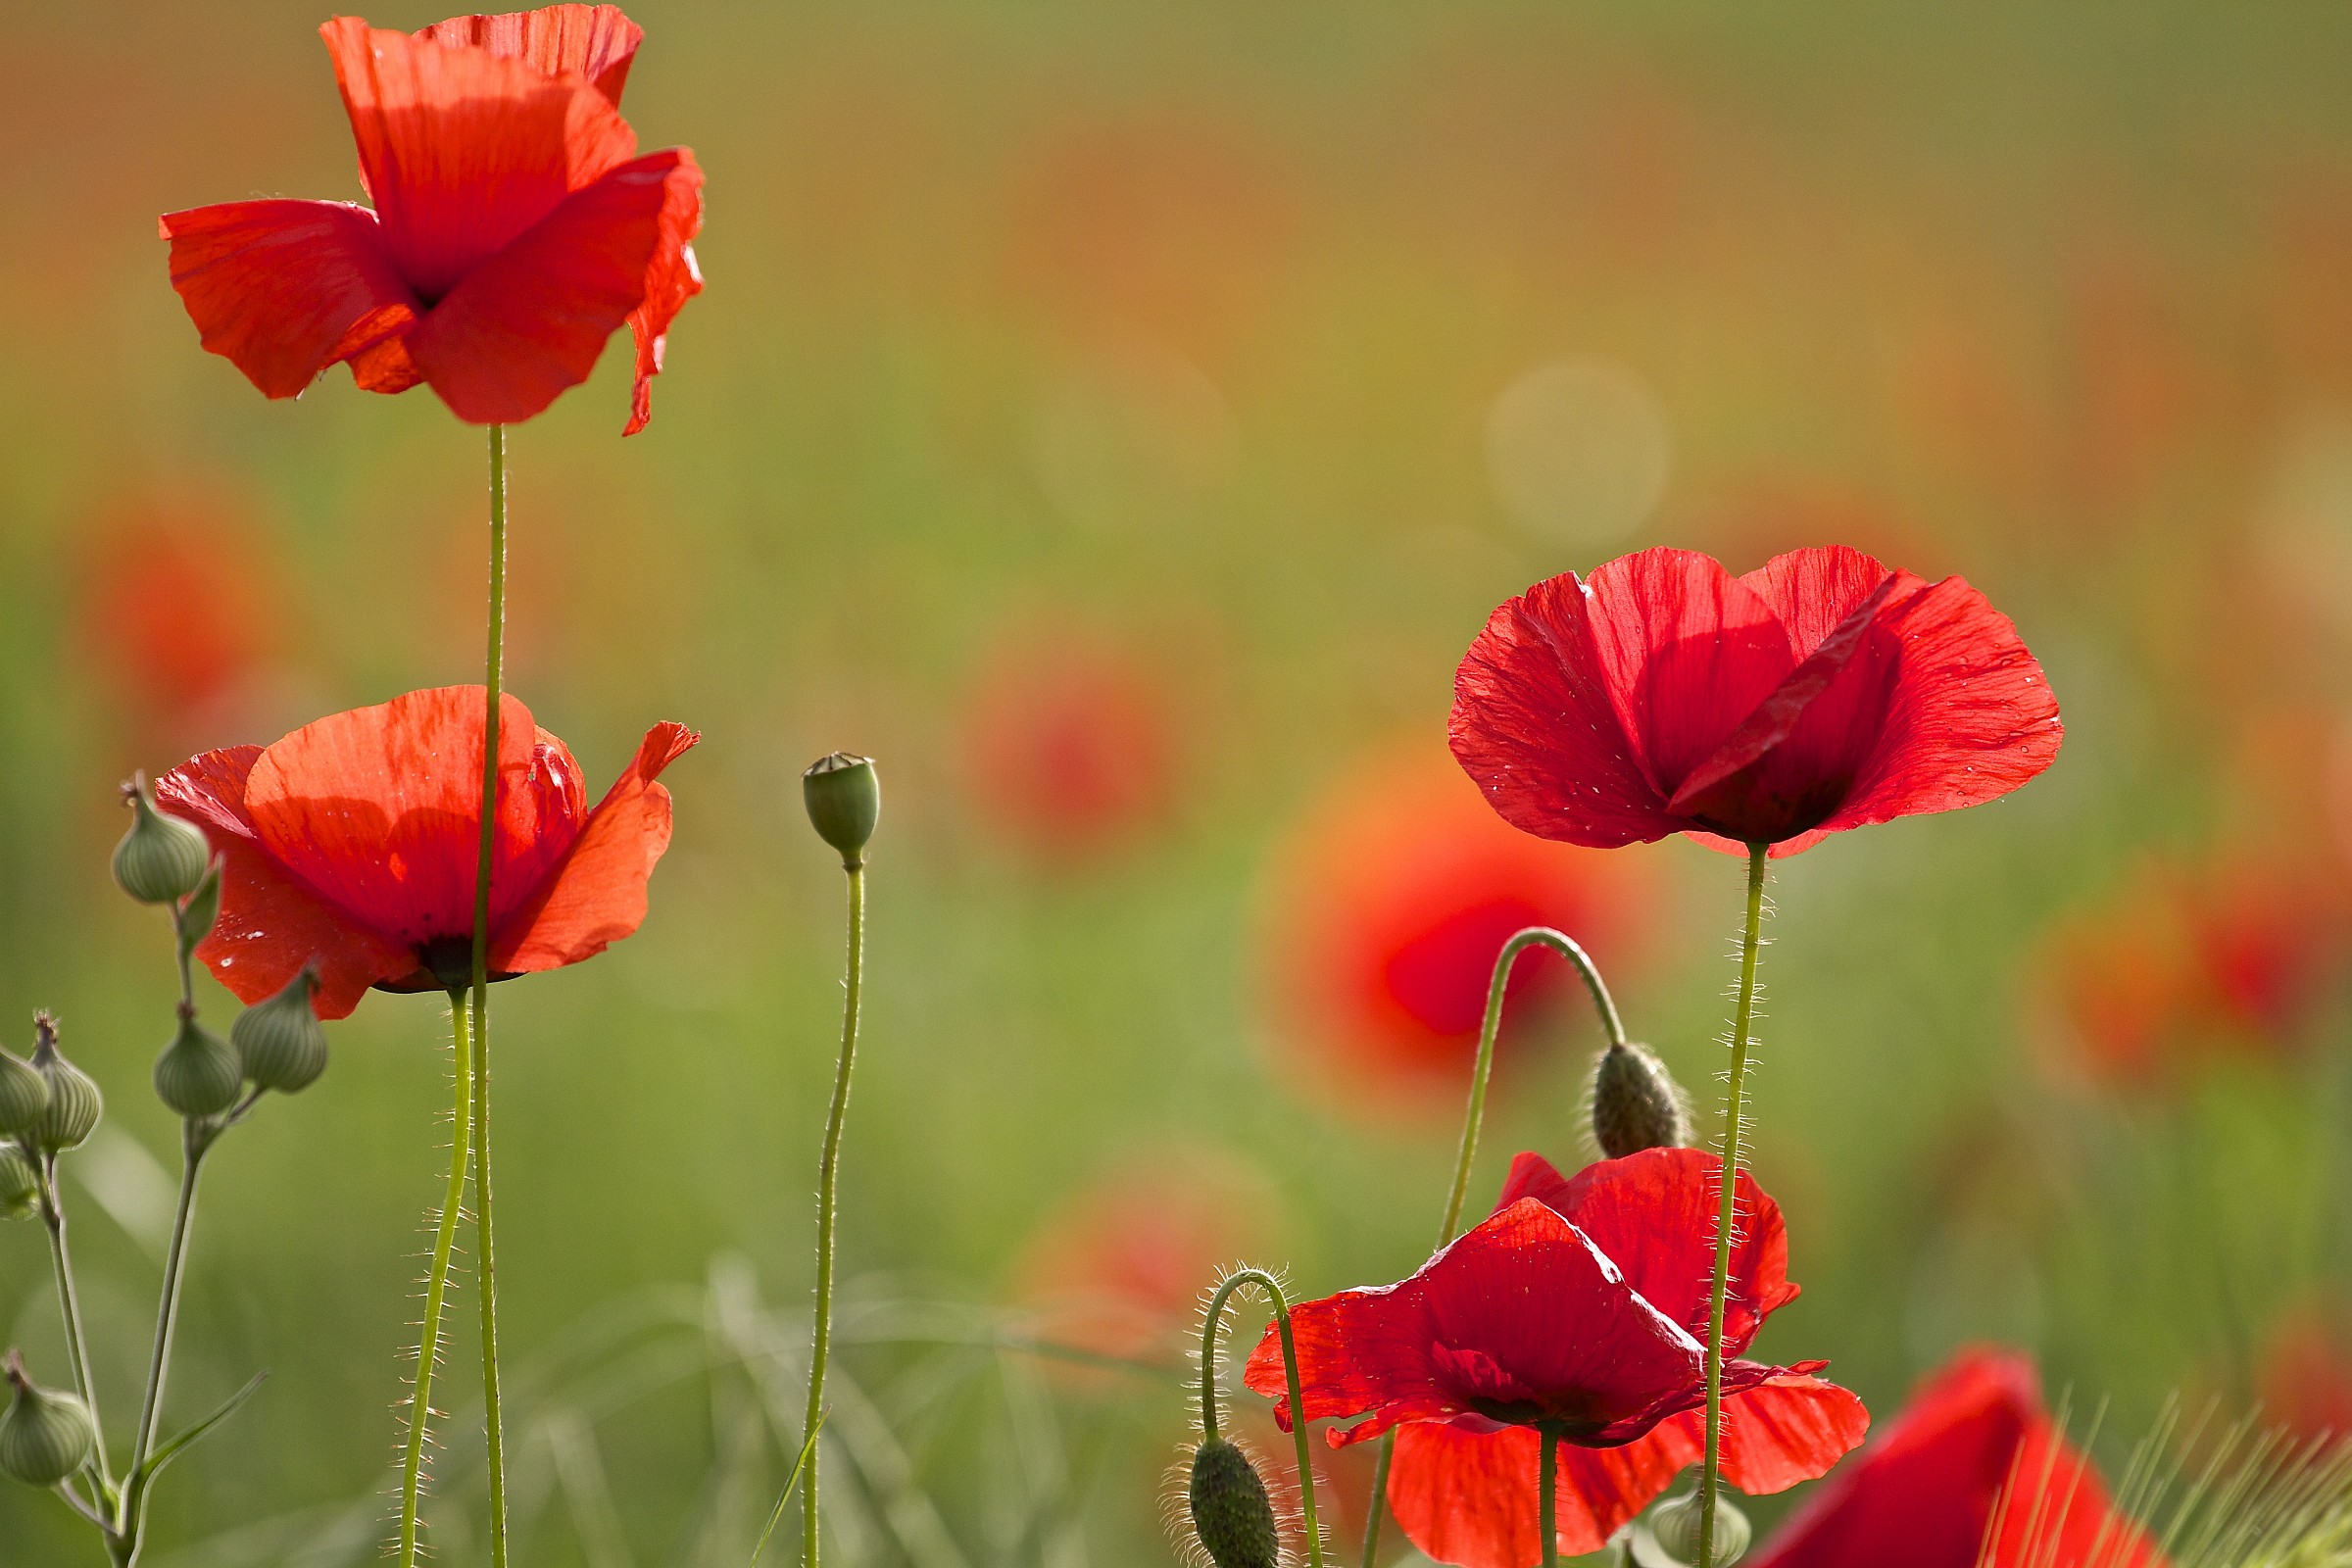 the poppy is also a flower .....